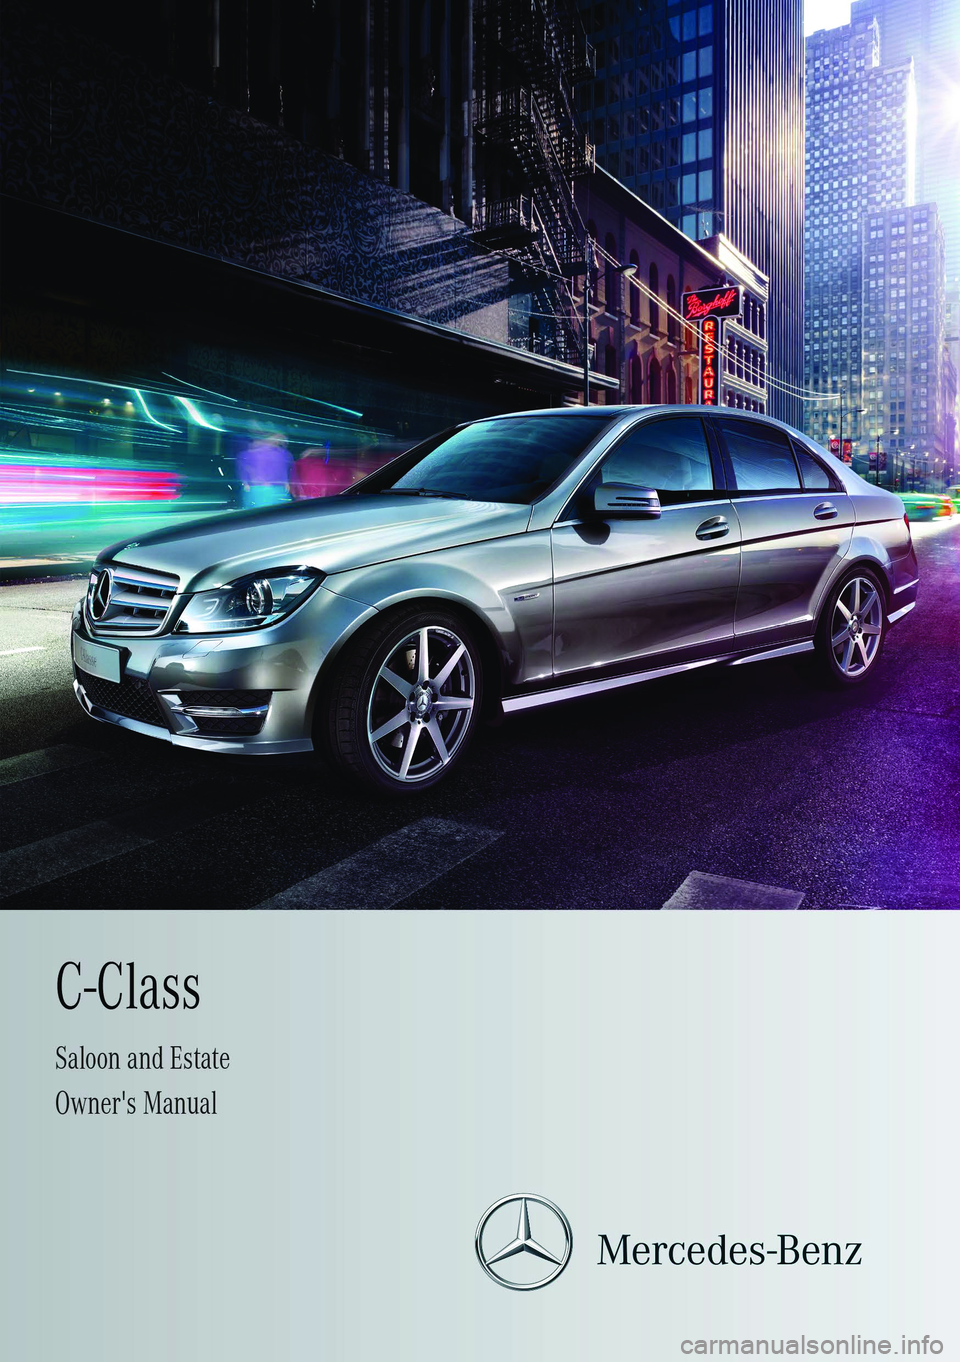 MERCEDES-BENZ C-CLASS SALOON 2011  Owners Manual 